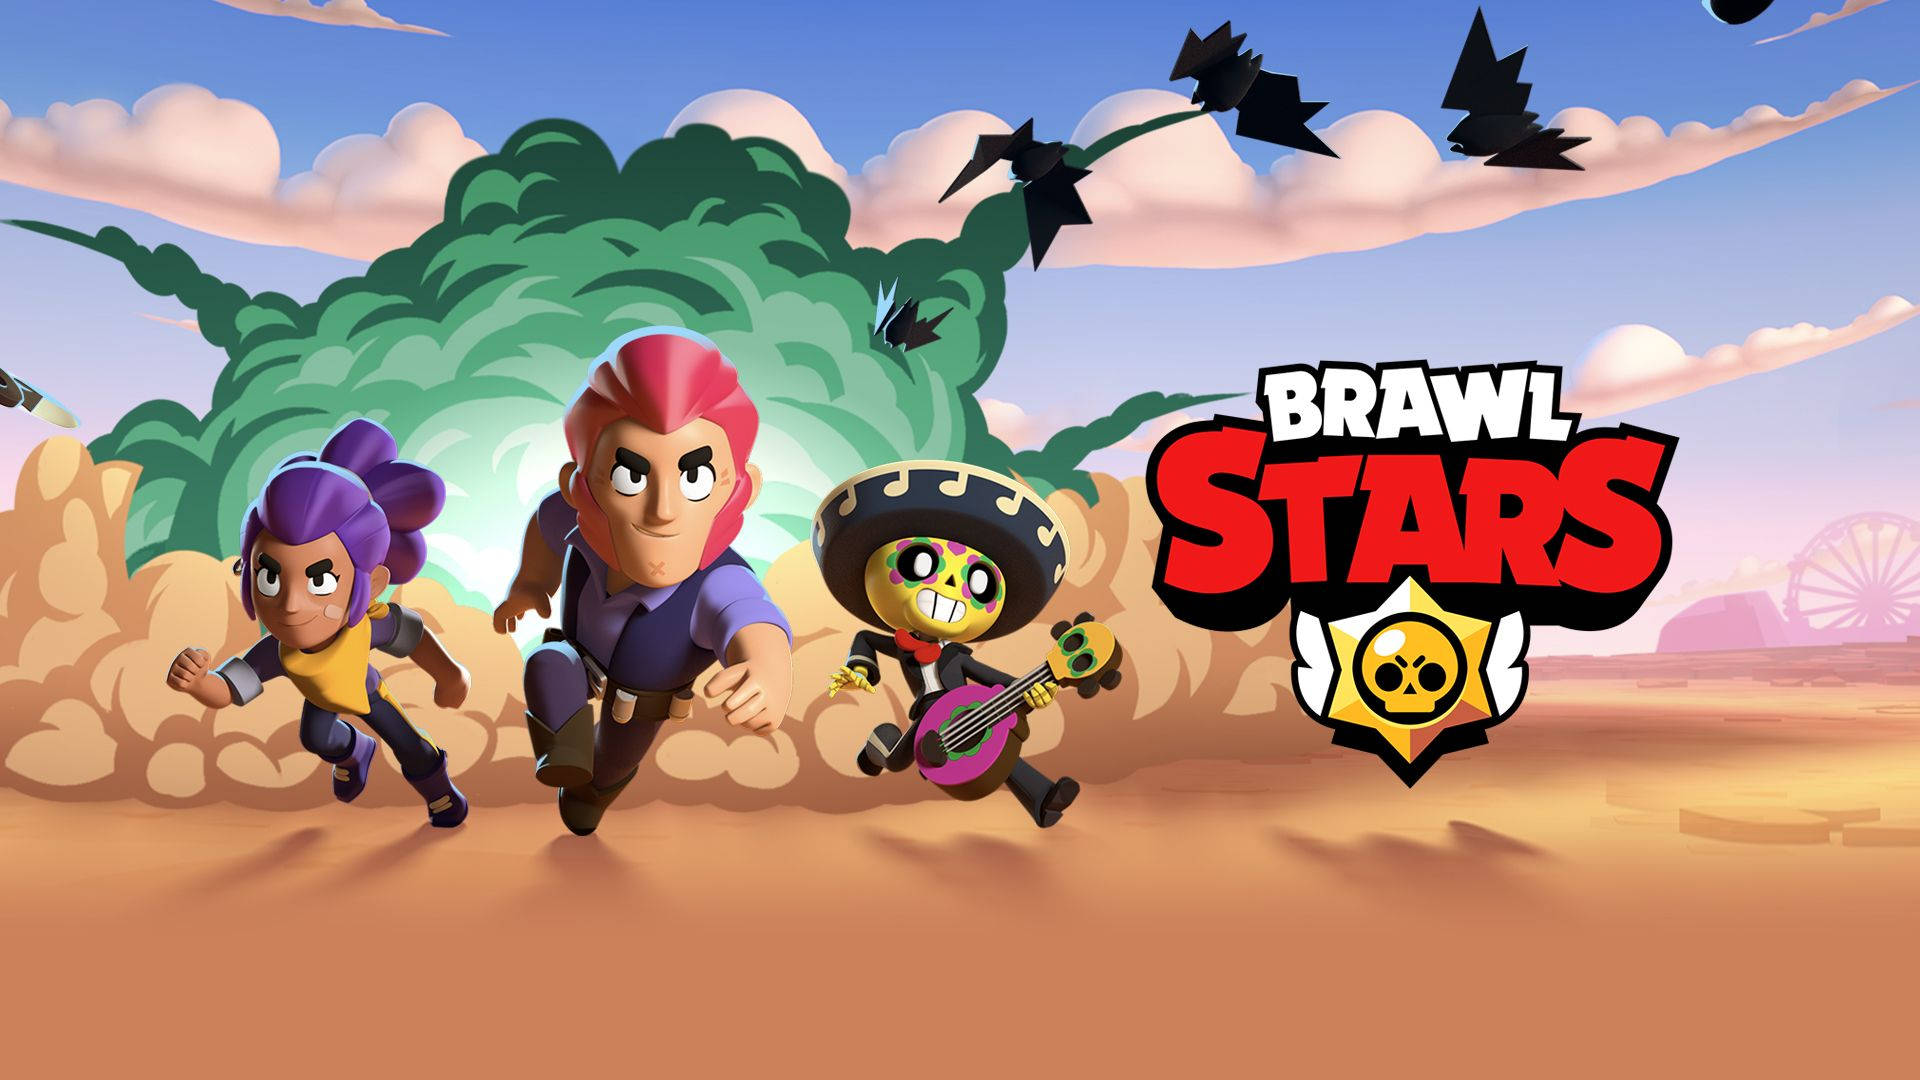 It's Time For Adventure! Join The Team In Brawl Stars’ Running Trio. Background